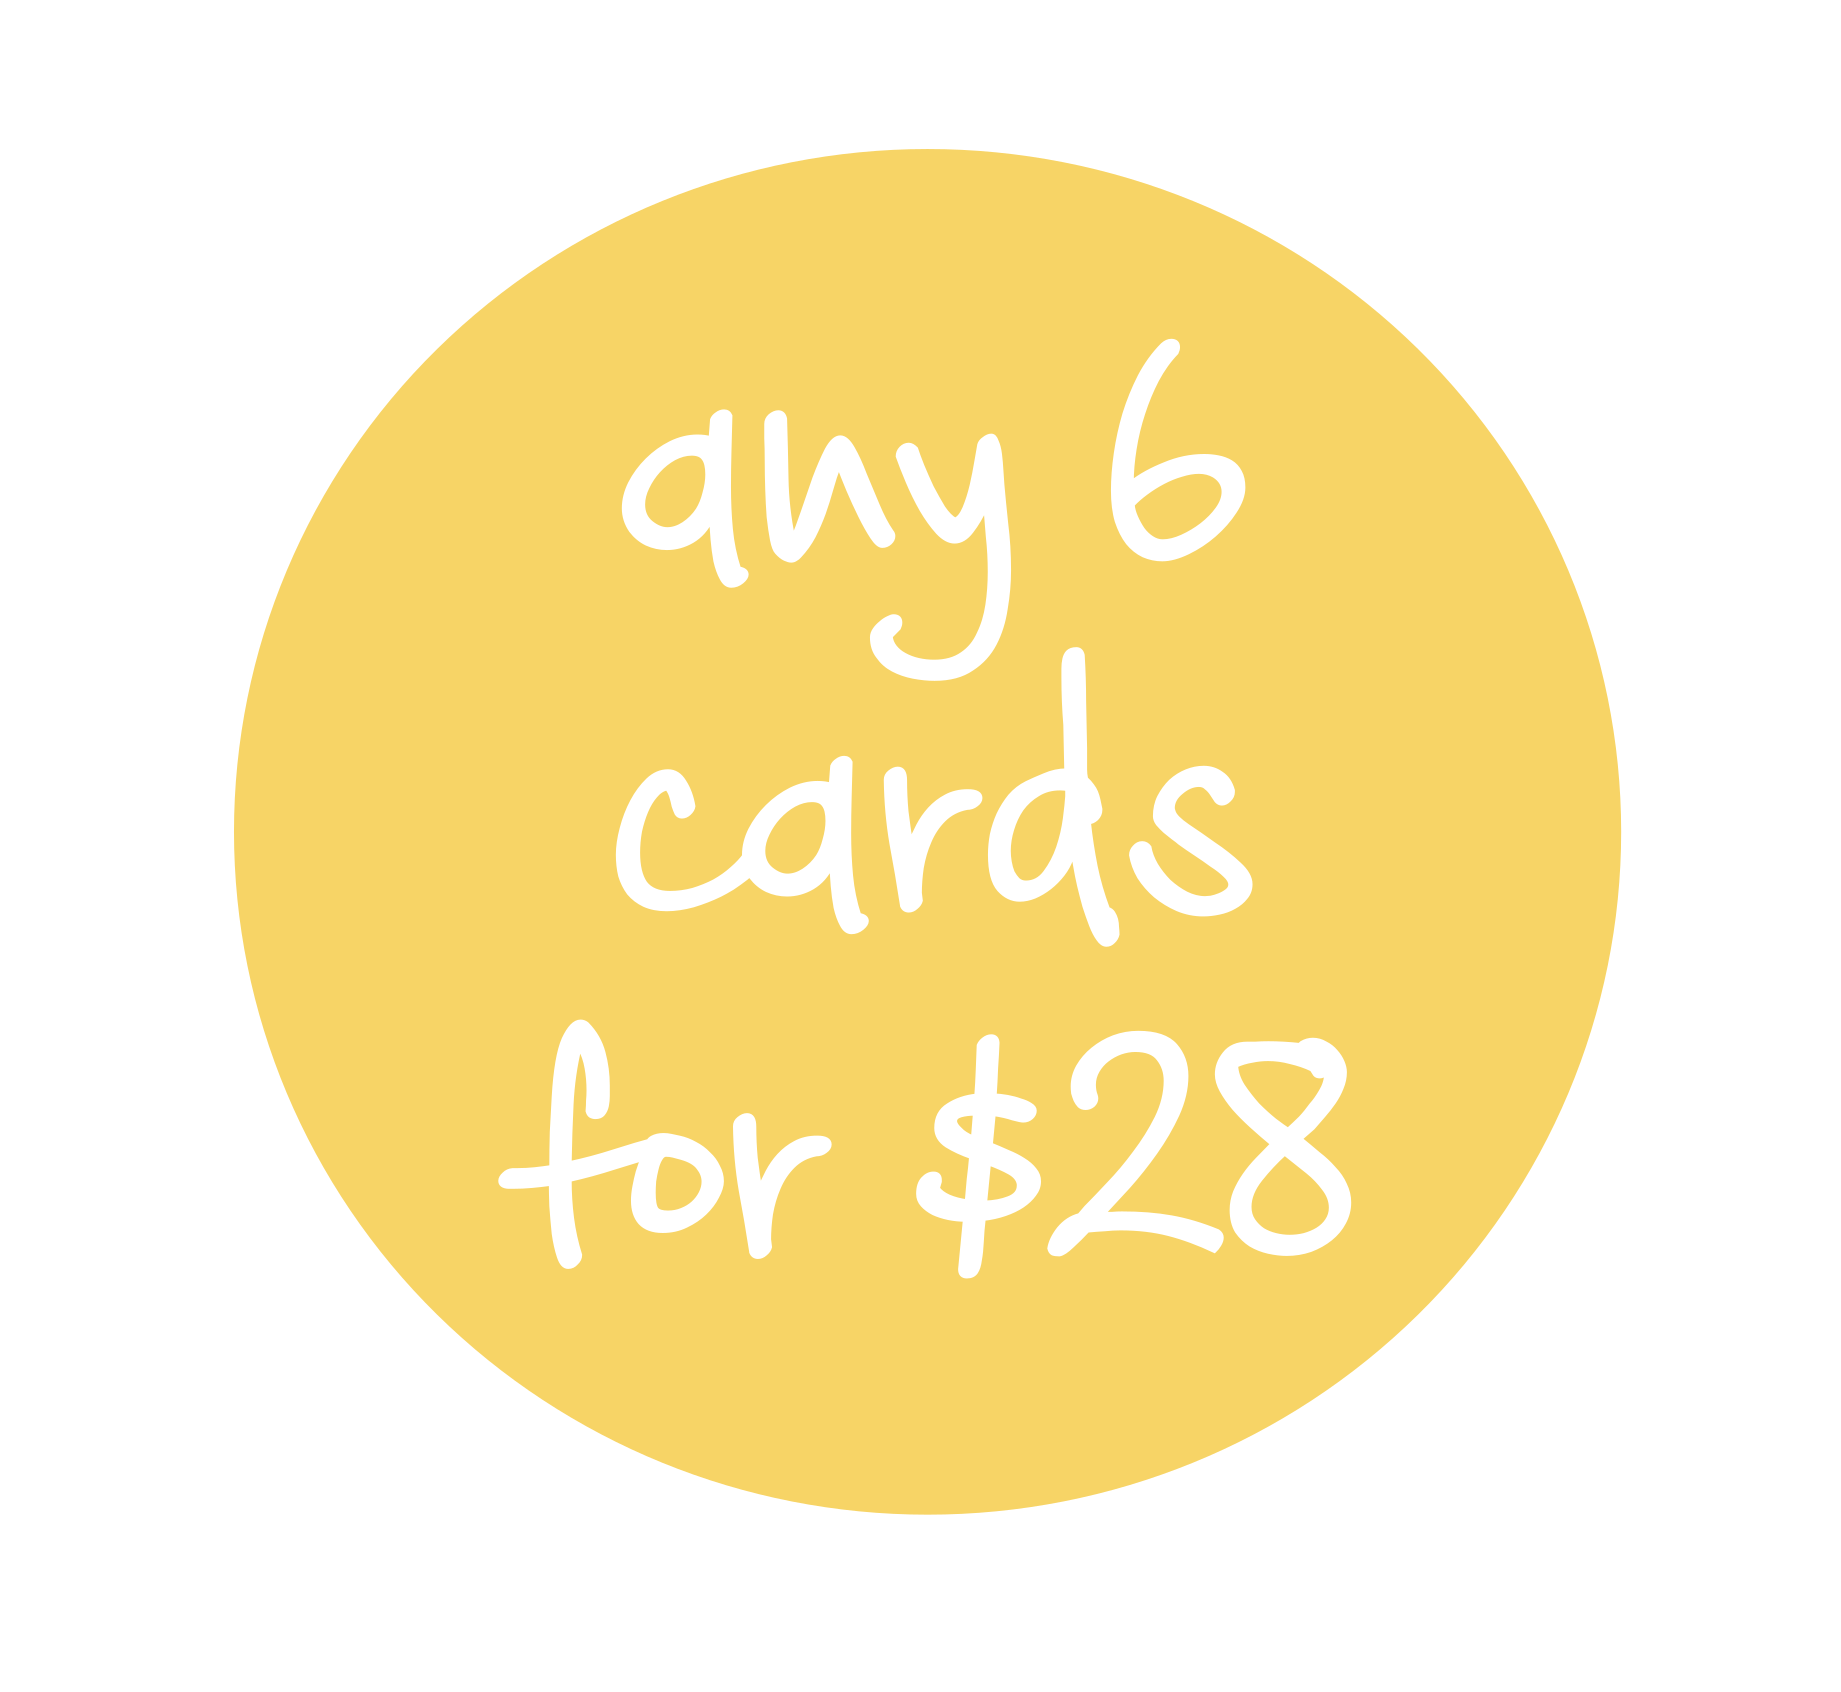 Any 6 cards for $28